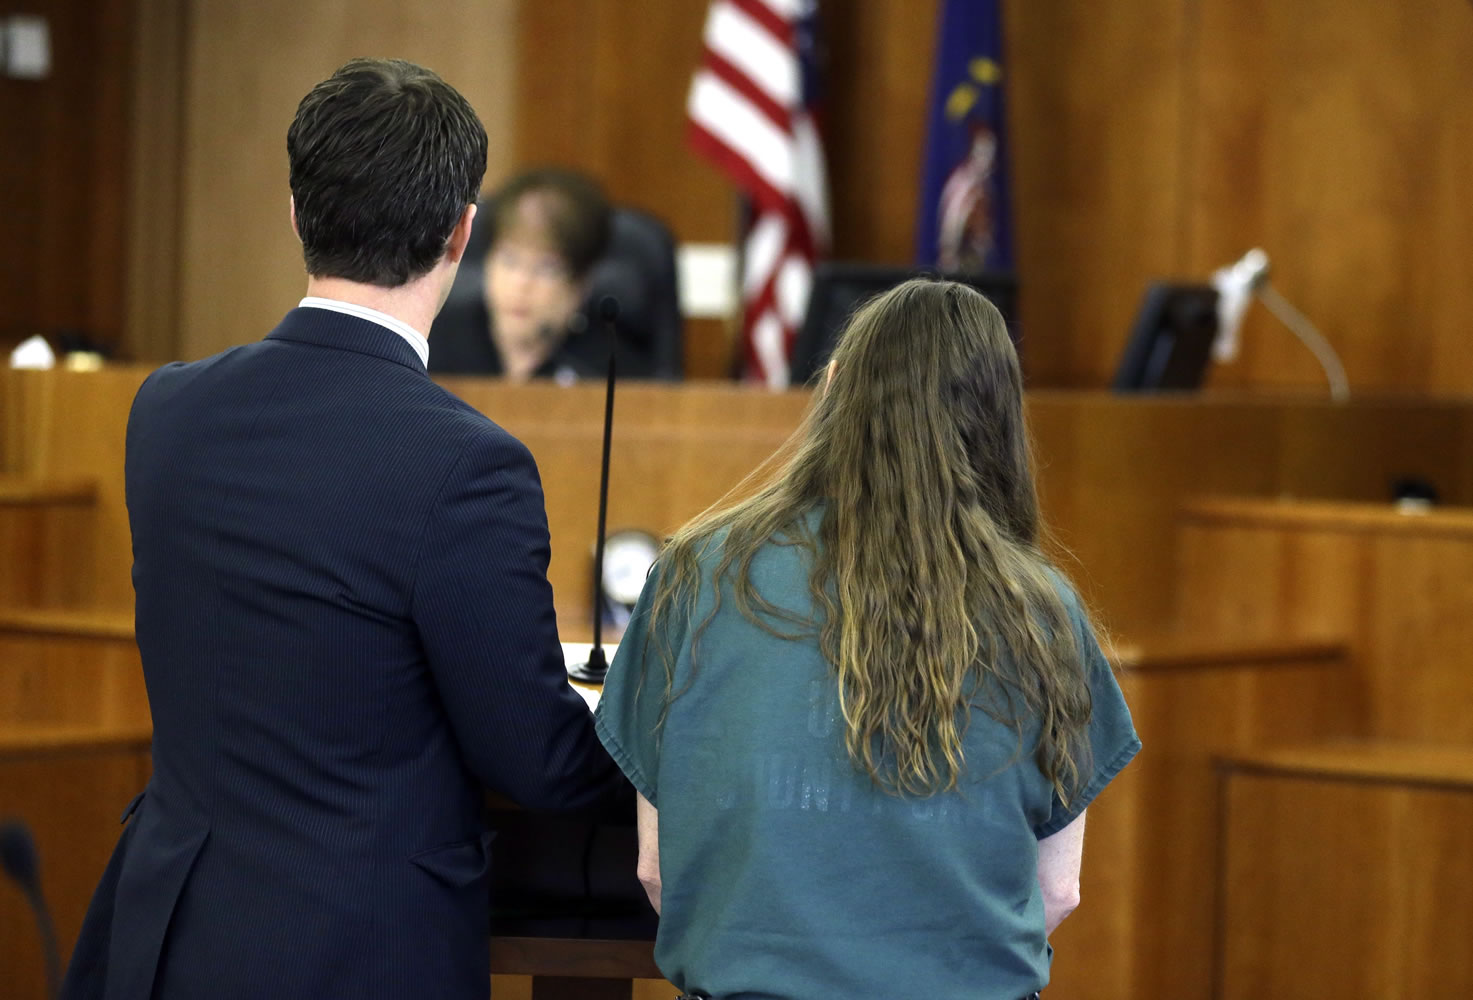 Megan Huntsman, right, who is accused of killing six of her babies and storing their bodies in her garage, appears in court with Doug Thompson, one of her defense attorneys, Monday in Provo, Utah.